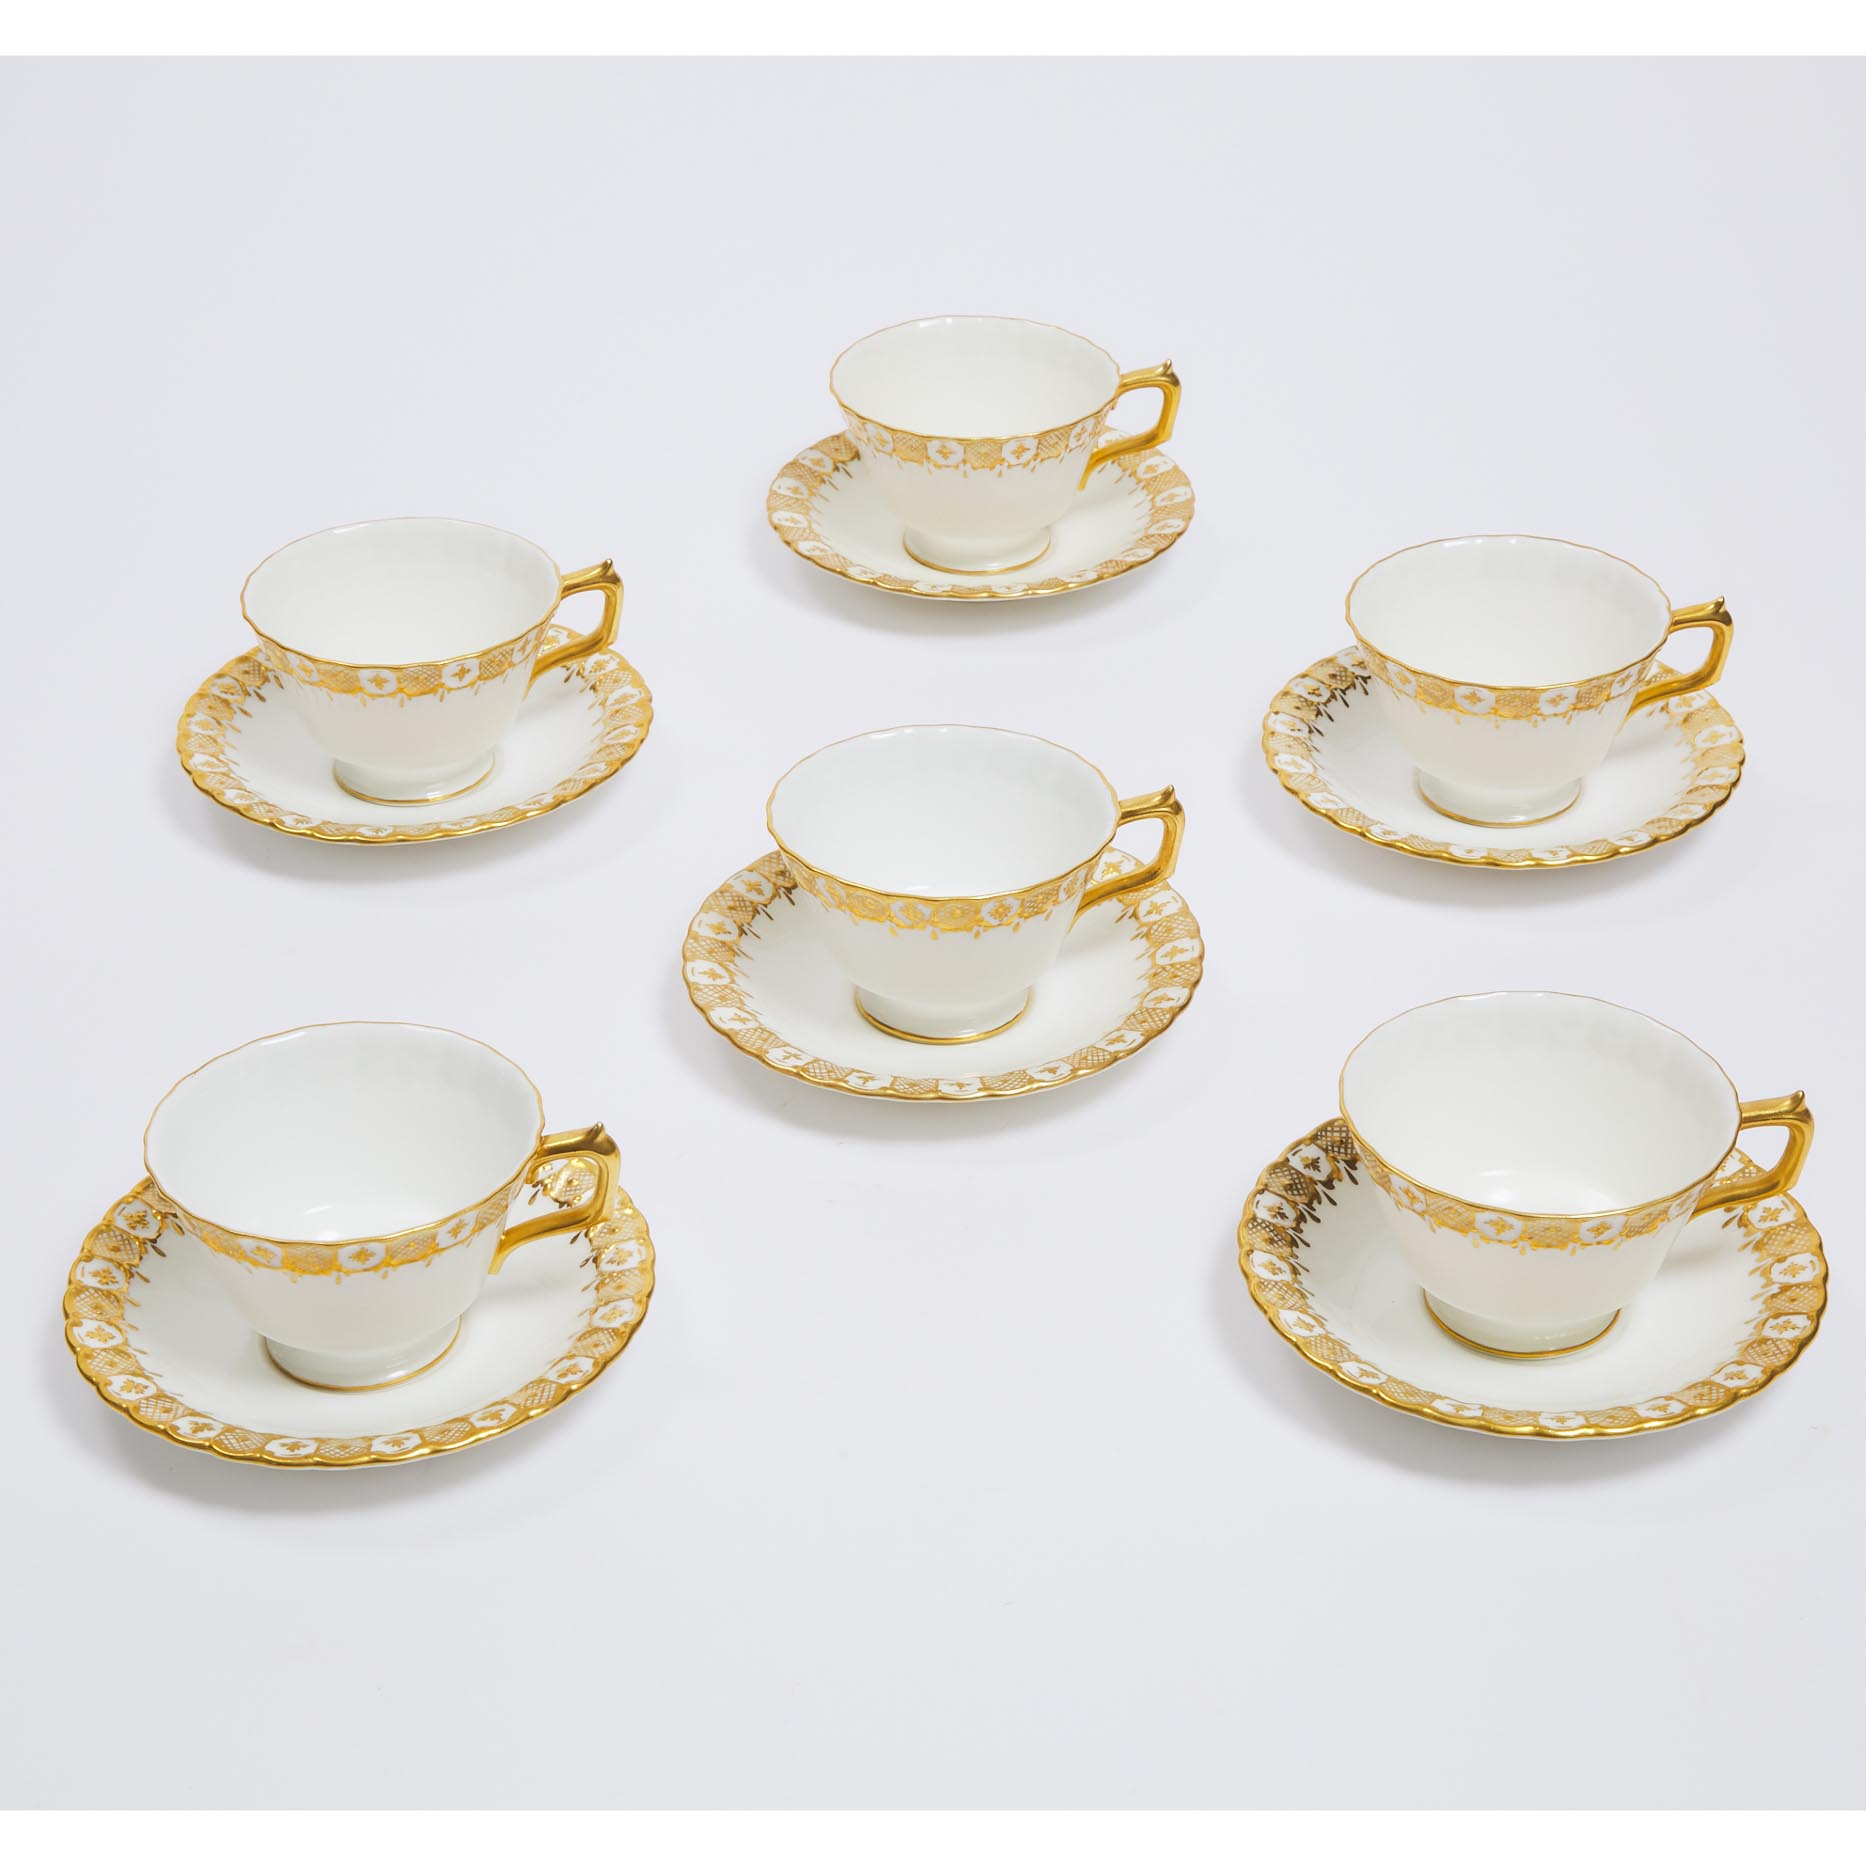 Six Royal Crown Derby 'Heraldic Gold' (1066) Pattern Cups and Saucers, 20th century